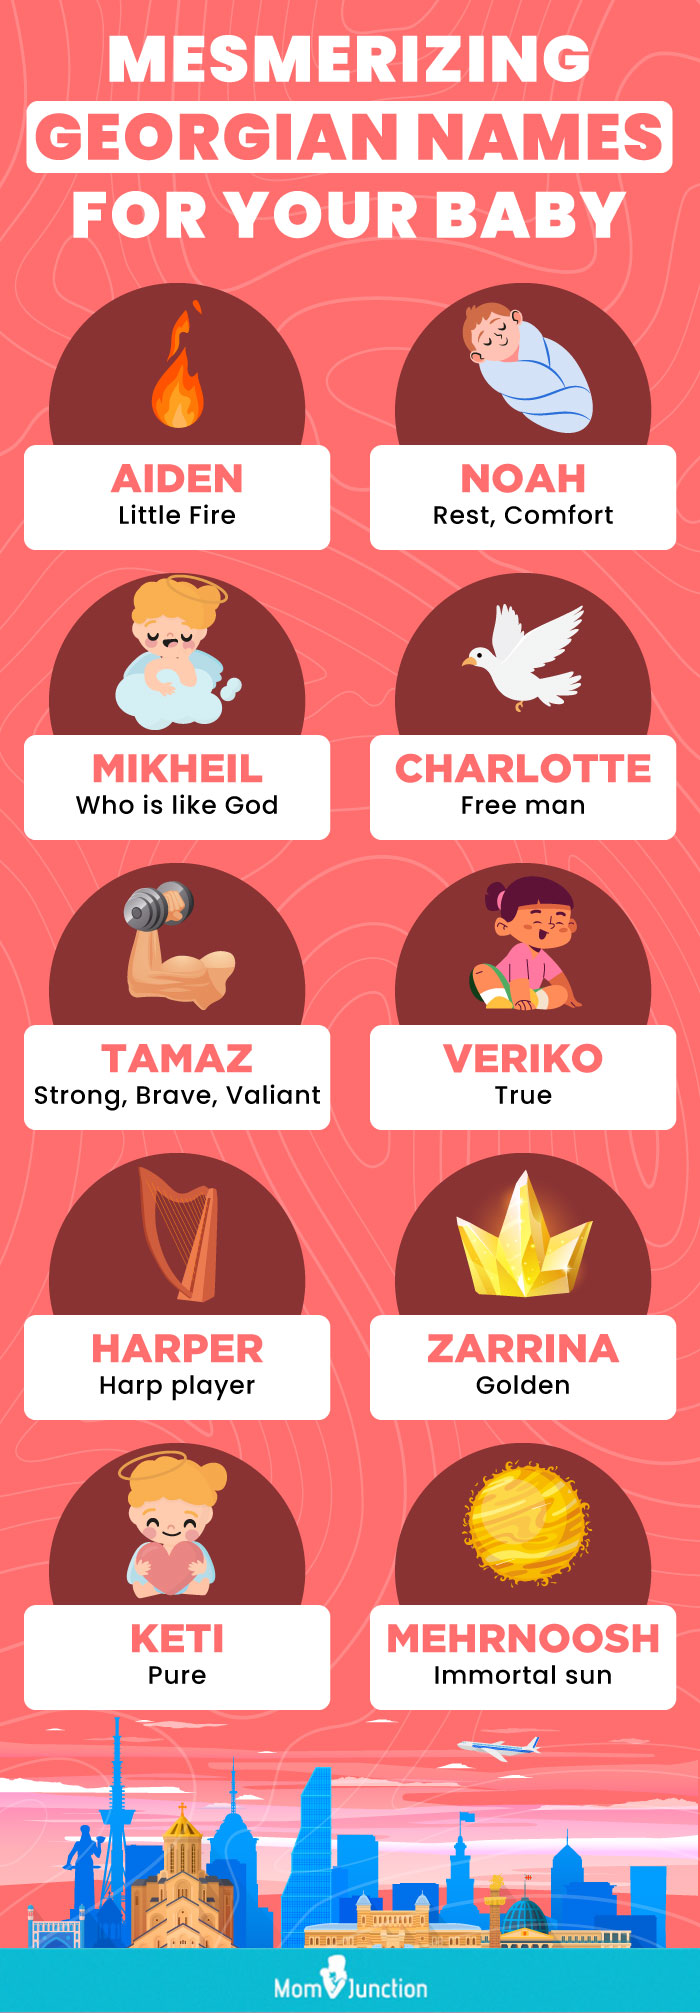 mesmerizing georgian names for your baby (infographic)